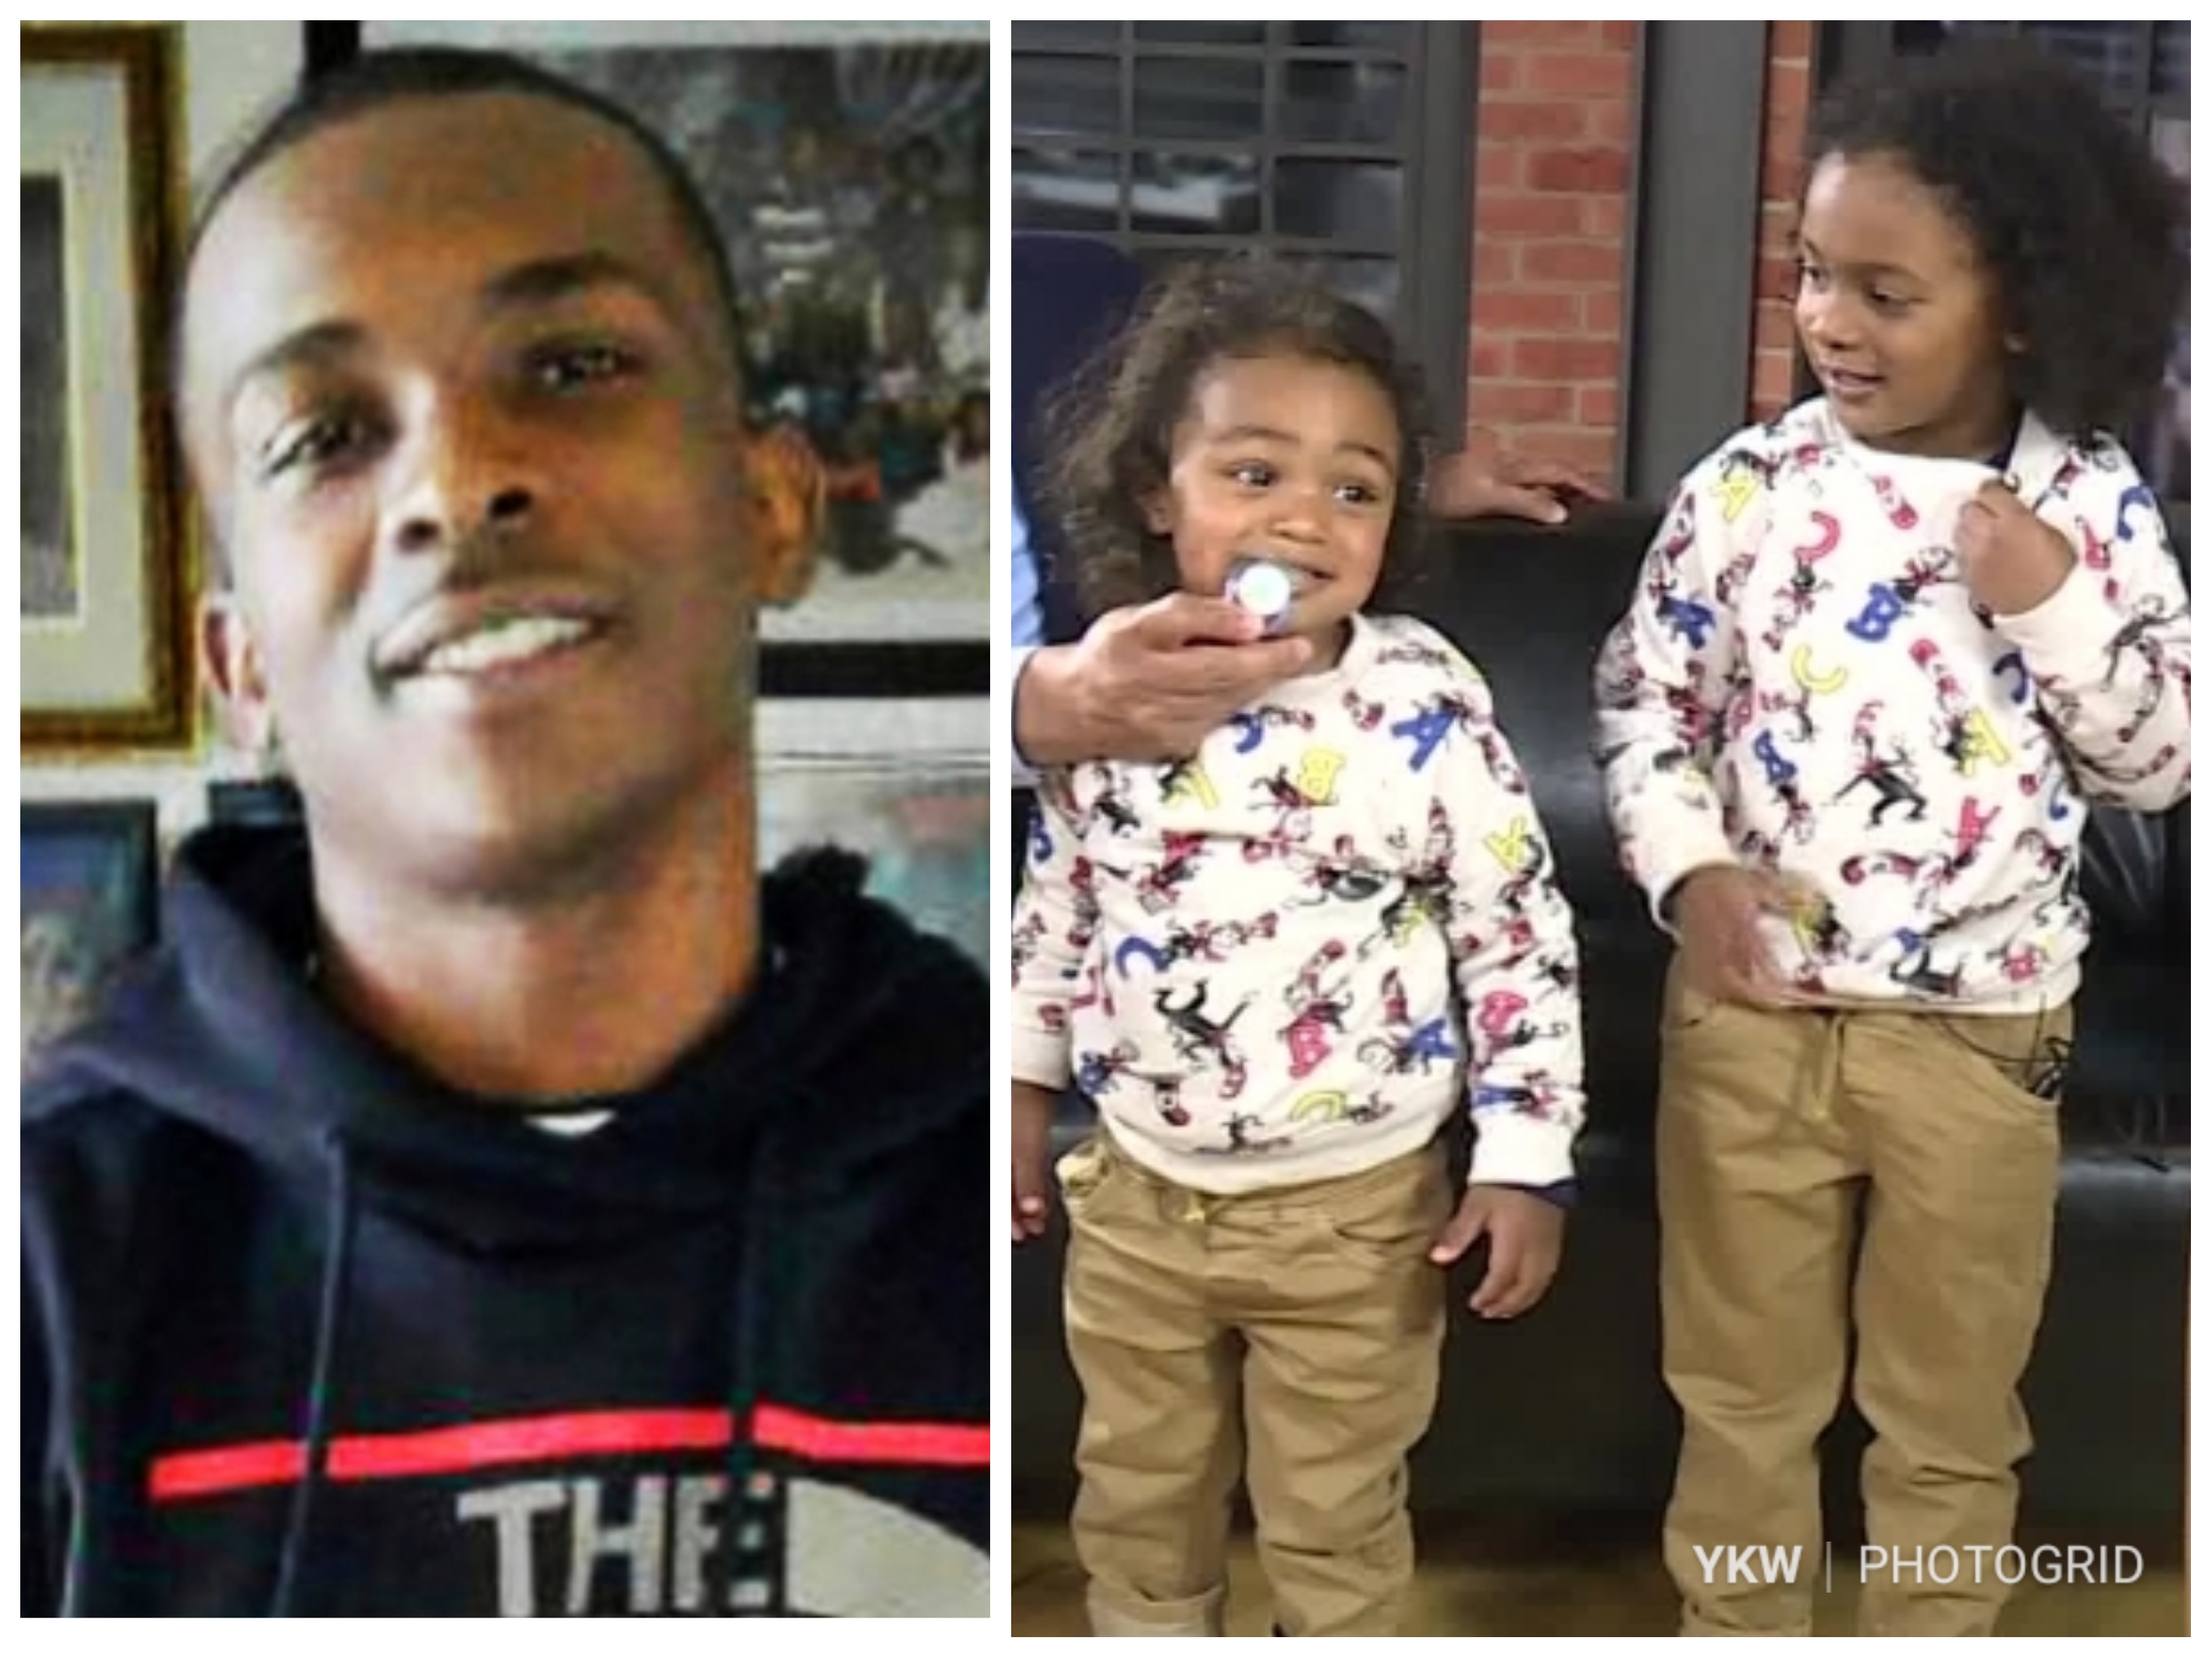 Sacramento Agrees To Pay $2.4 Million To Stephon Clark’s Children In Wrongful Death Shooting Settlement